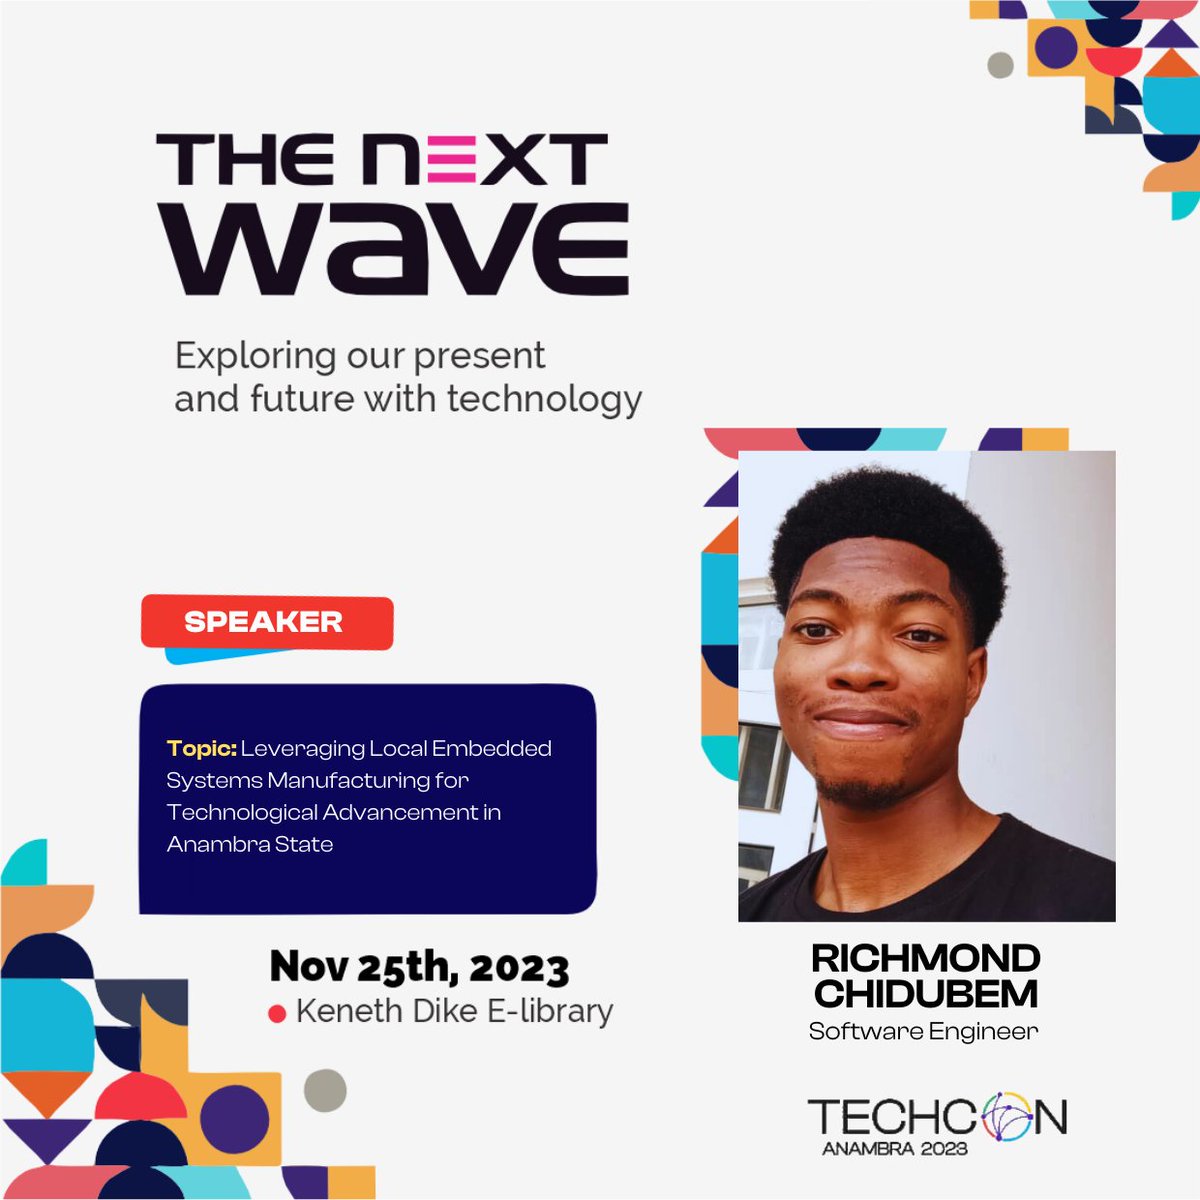 Introducing another rockstart speaker for #TechConAnambra 🚀 

Richmond is an experienced Embedded Systems Software Engineer with over two years in the industry. He also possesses expertise in mobile application development, computer vision, and robotics.

#TheNextWave #TechCon23